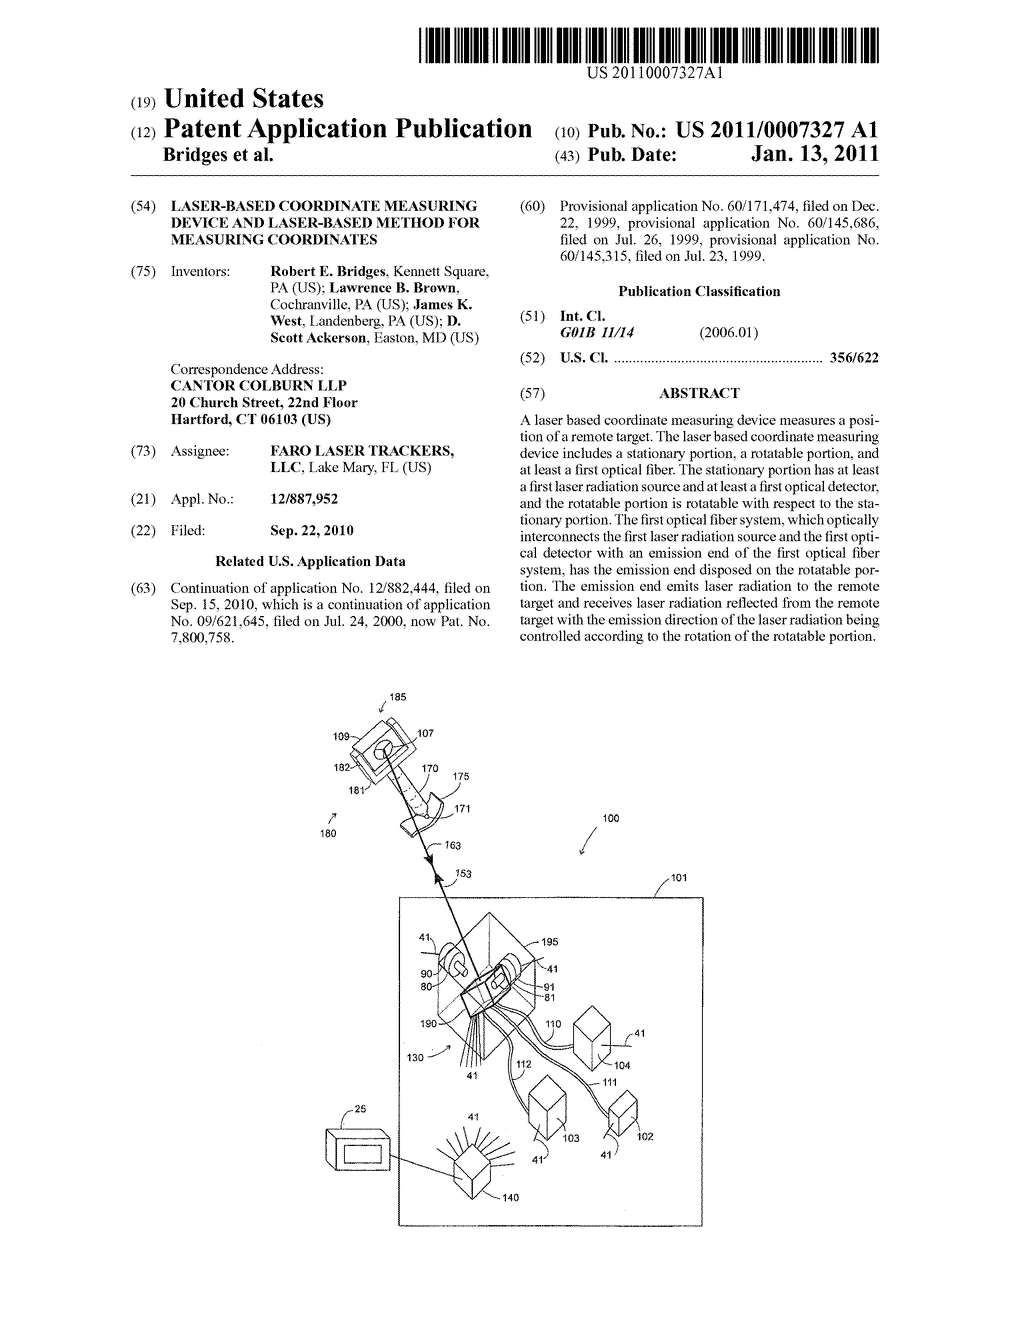 LASER-BASED COORDINATE MEASURING DEVICE AND LASER-BASED METHOD FOR MEASURING COORDINATES - diagram, schematic, and image 01